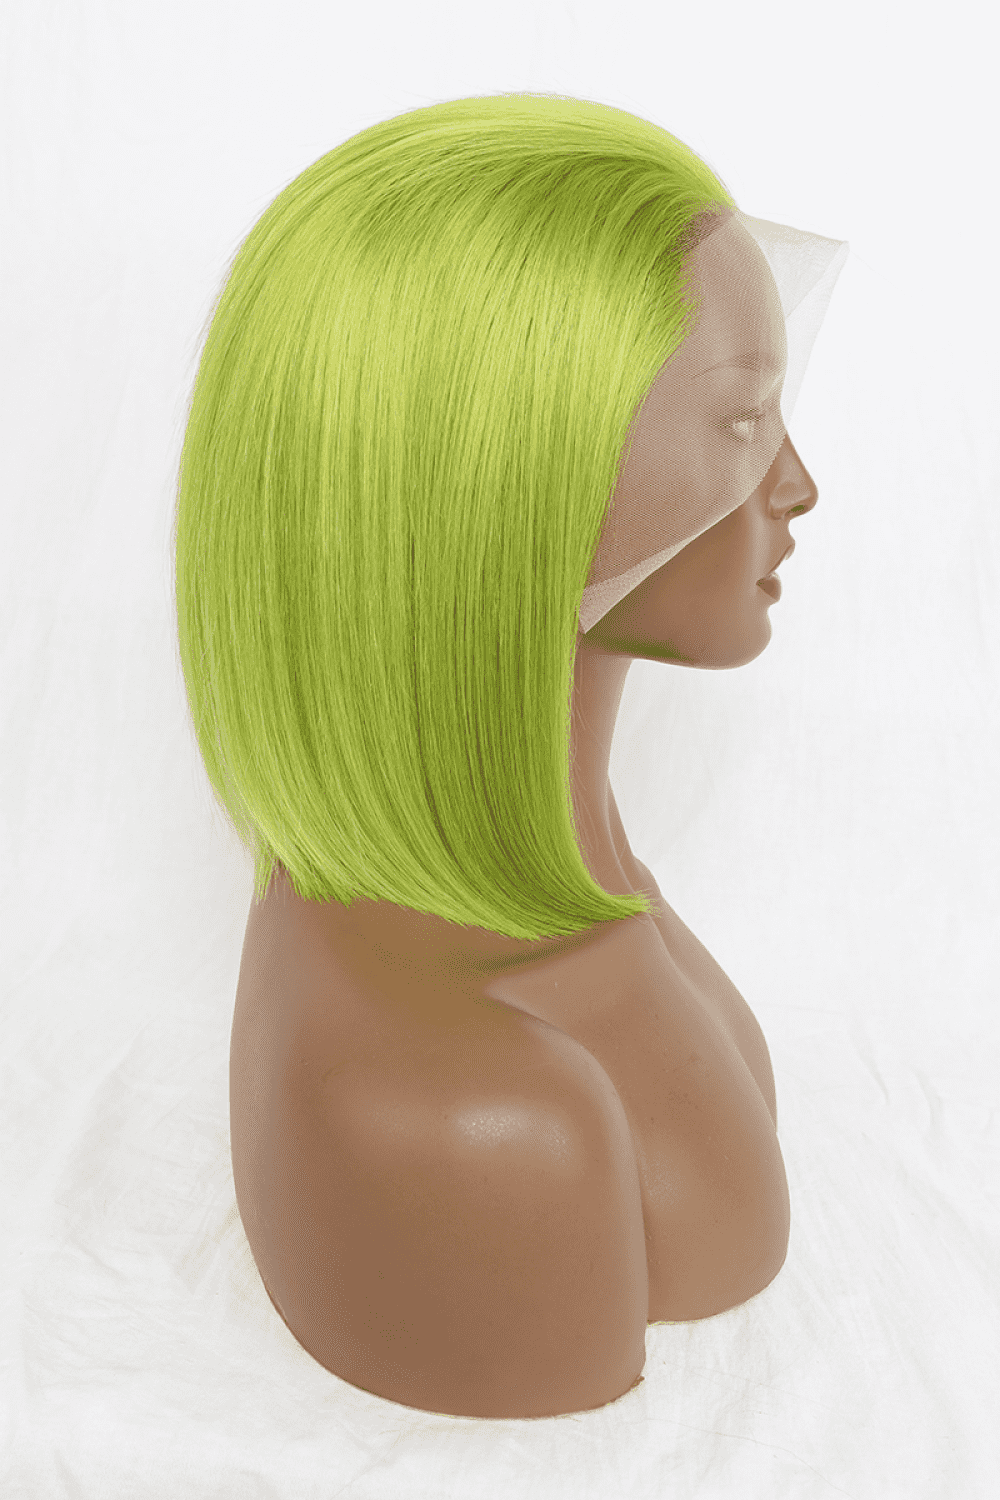 Lace Front Wigs Human Hair in Lime 150% Density